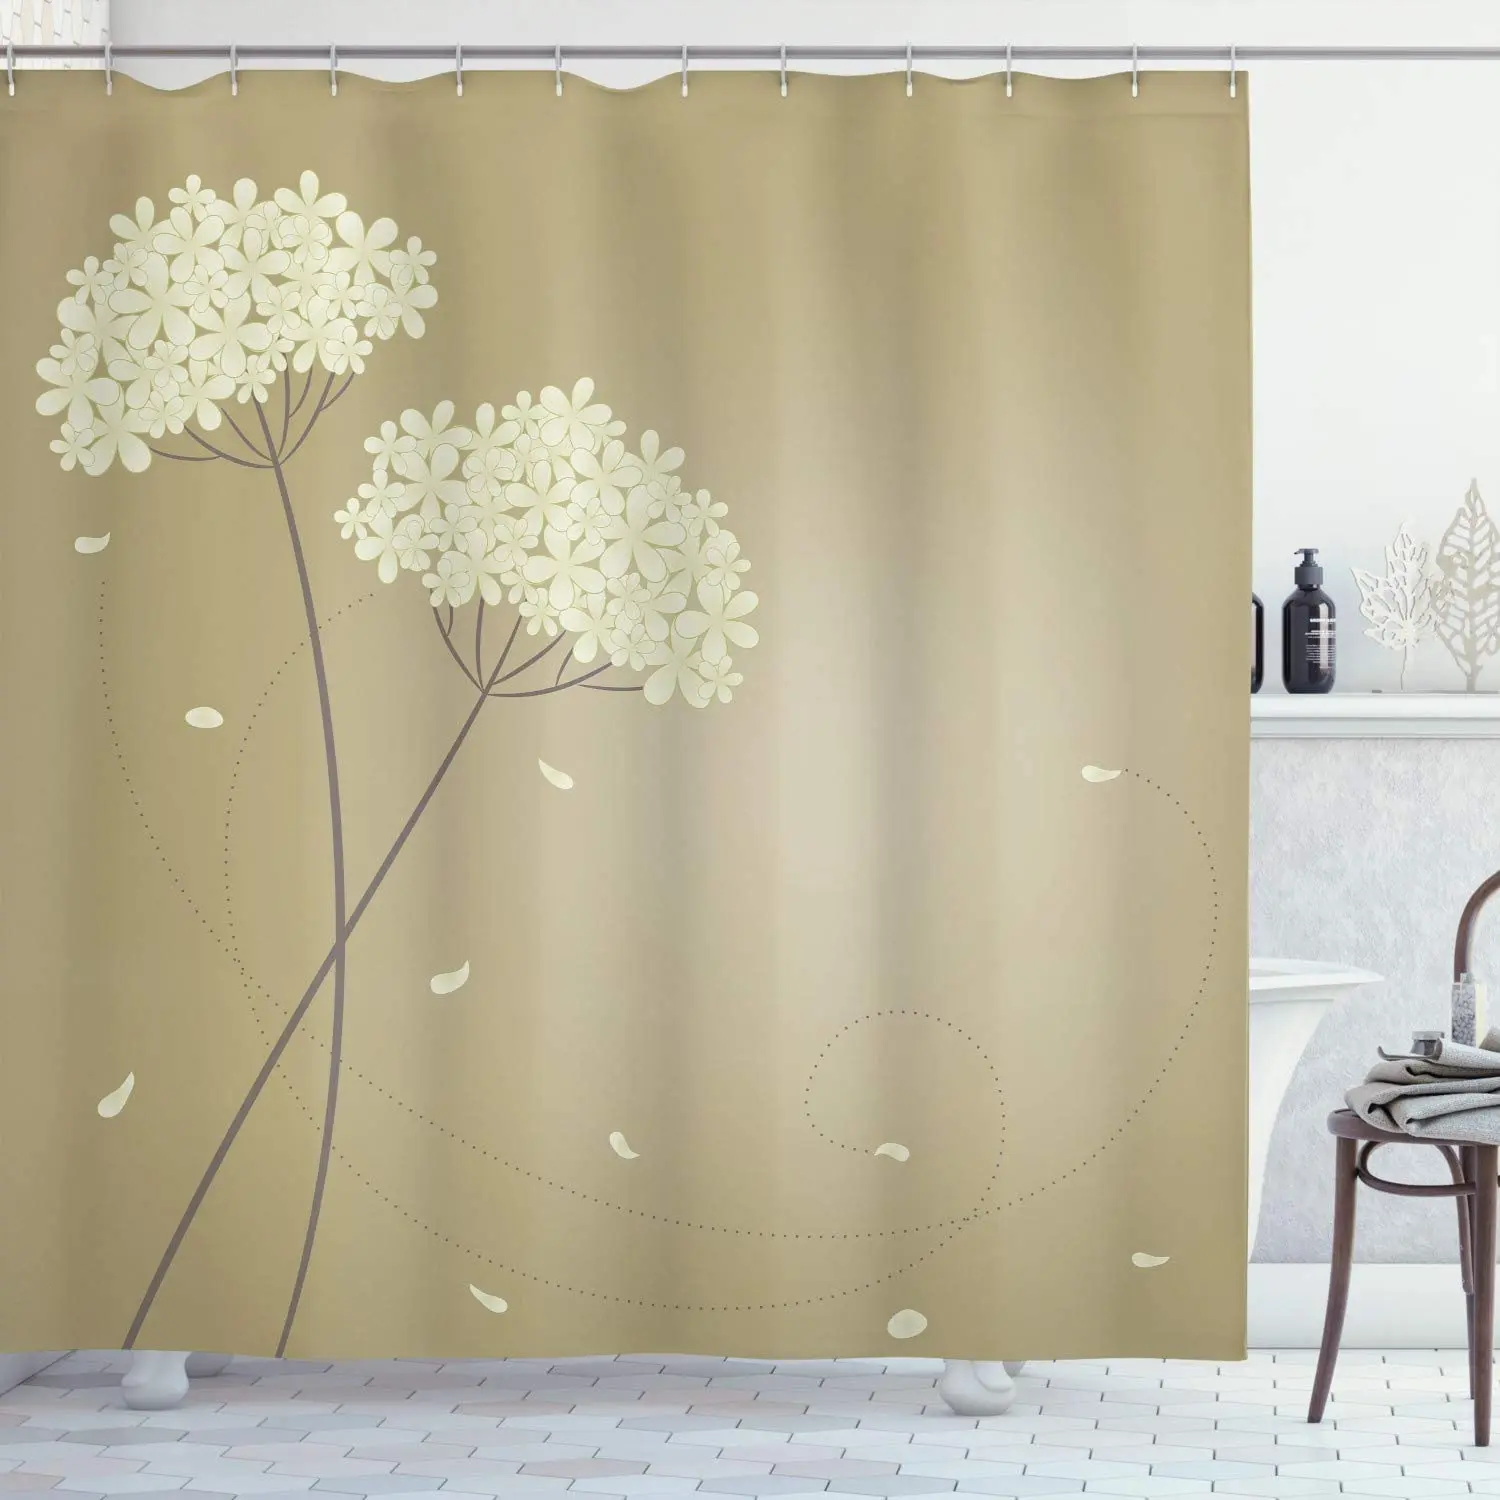 Allium Flower Shower Curtains Floral Design with Swirl Lines Falling Leaves Autumn Inspired Cloth Fabric Bathroom Decor Set